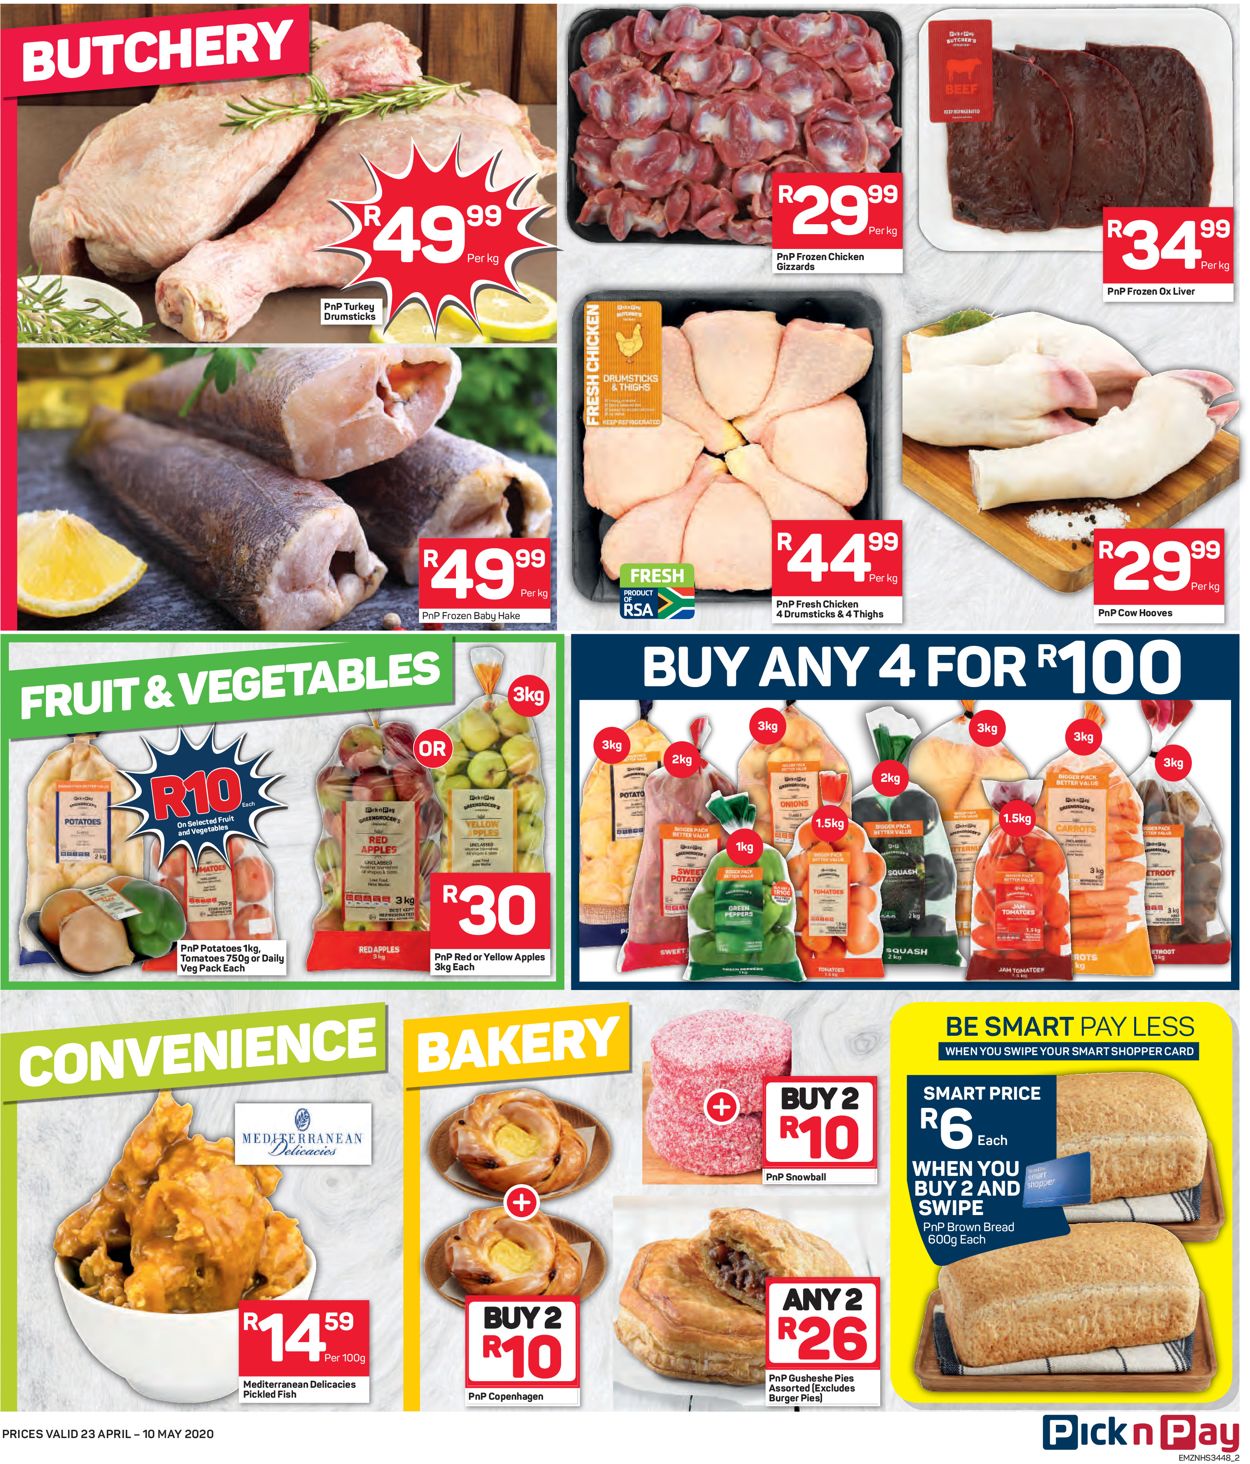 Pick n Pay Catalogue - 2020/04/23-2020/05/10 (Page 2)